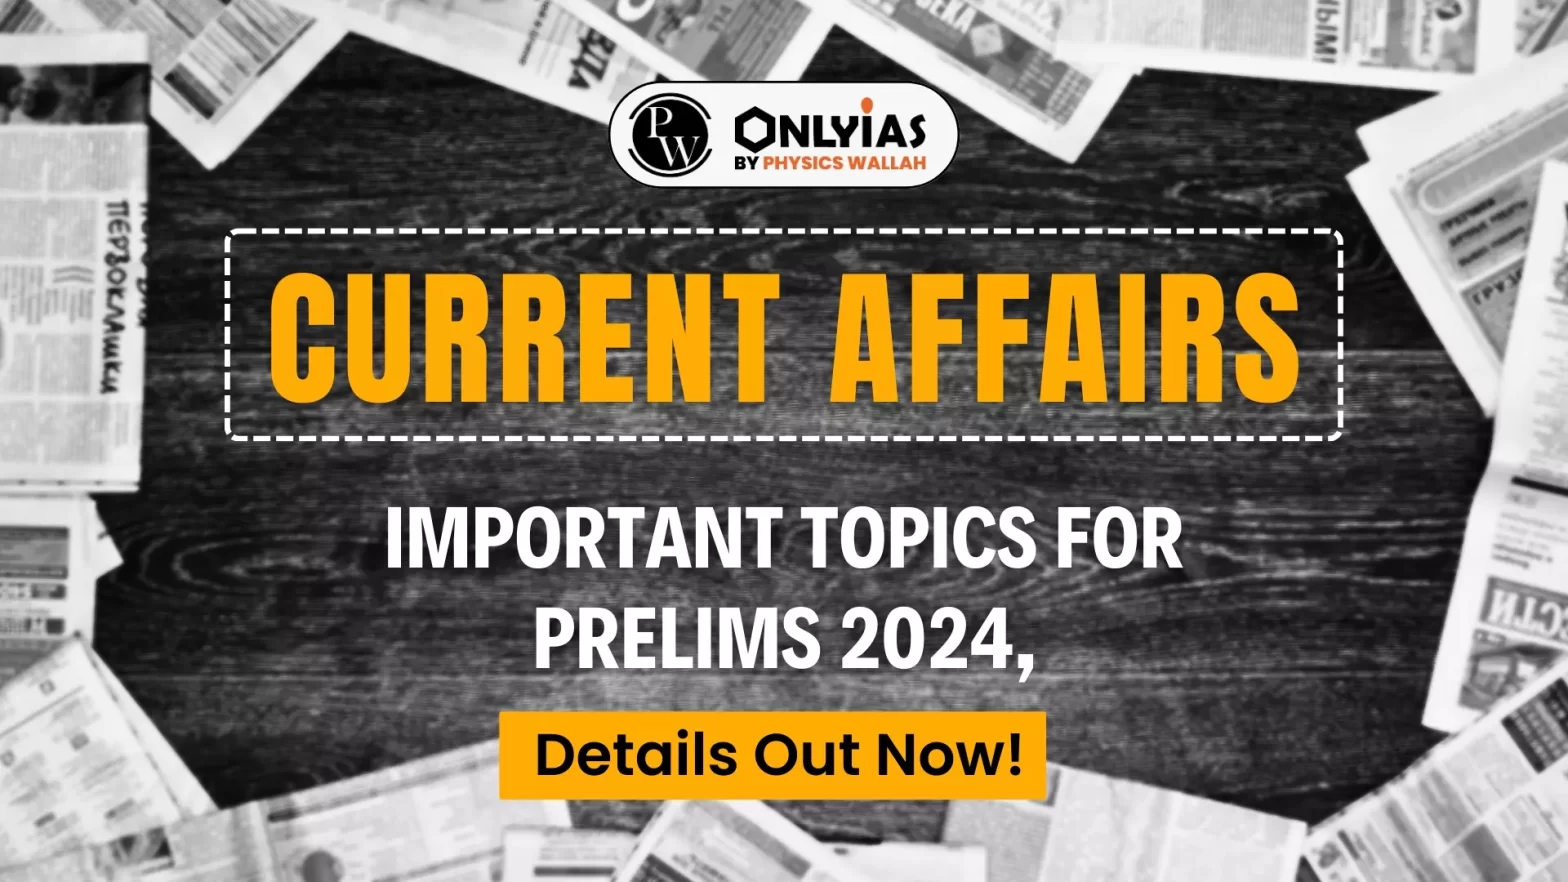 Current Affairs Important Topics for Prelims 2024, Details Out Now!